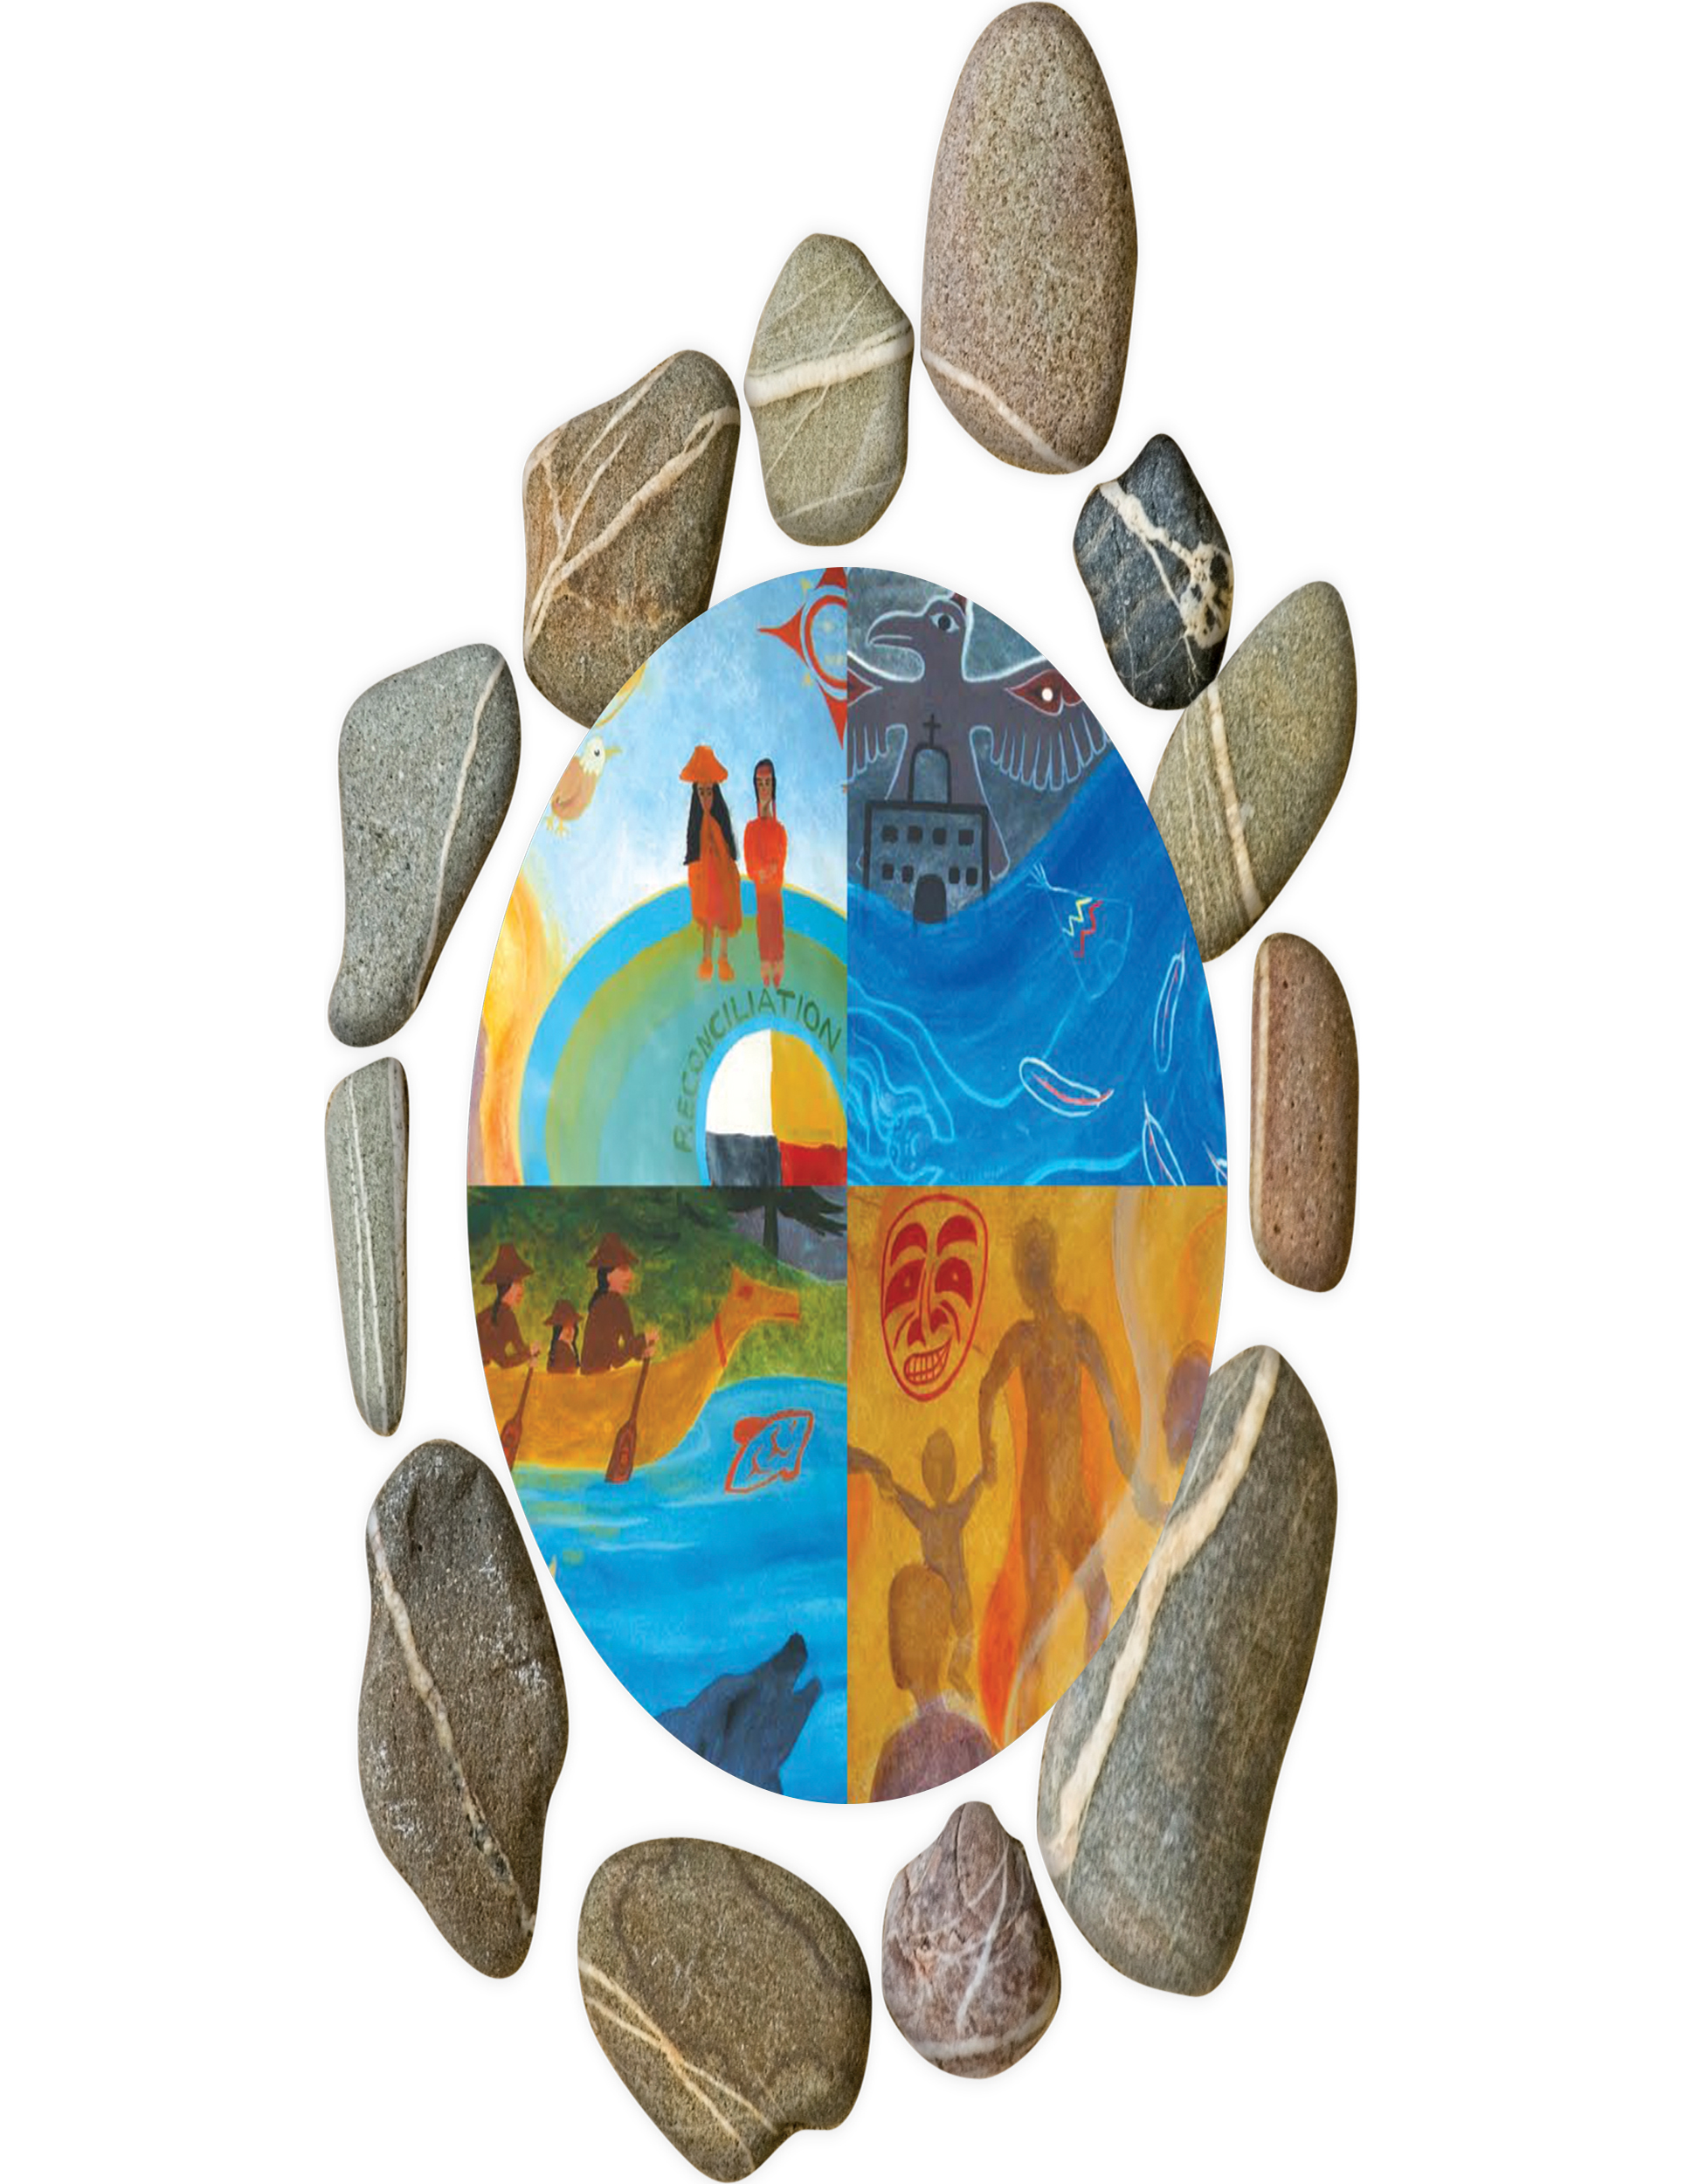 Small stones surrounding a circle broken into four quadrants. In each of the four quadrants is part of a painting from a mural depicting parts of Indigenous history and how it was affected by colonization.